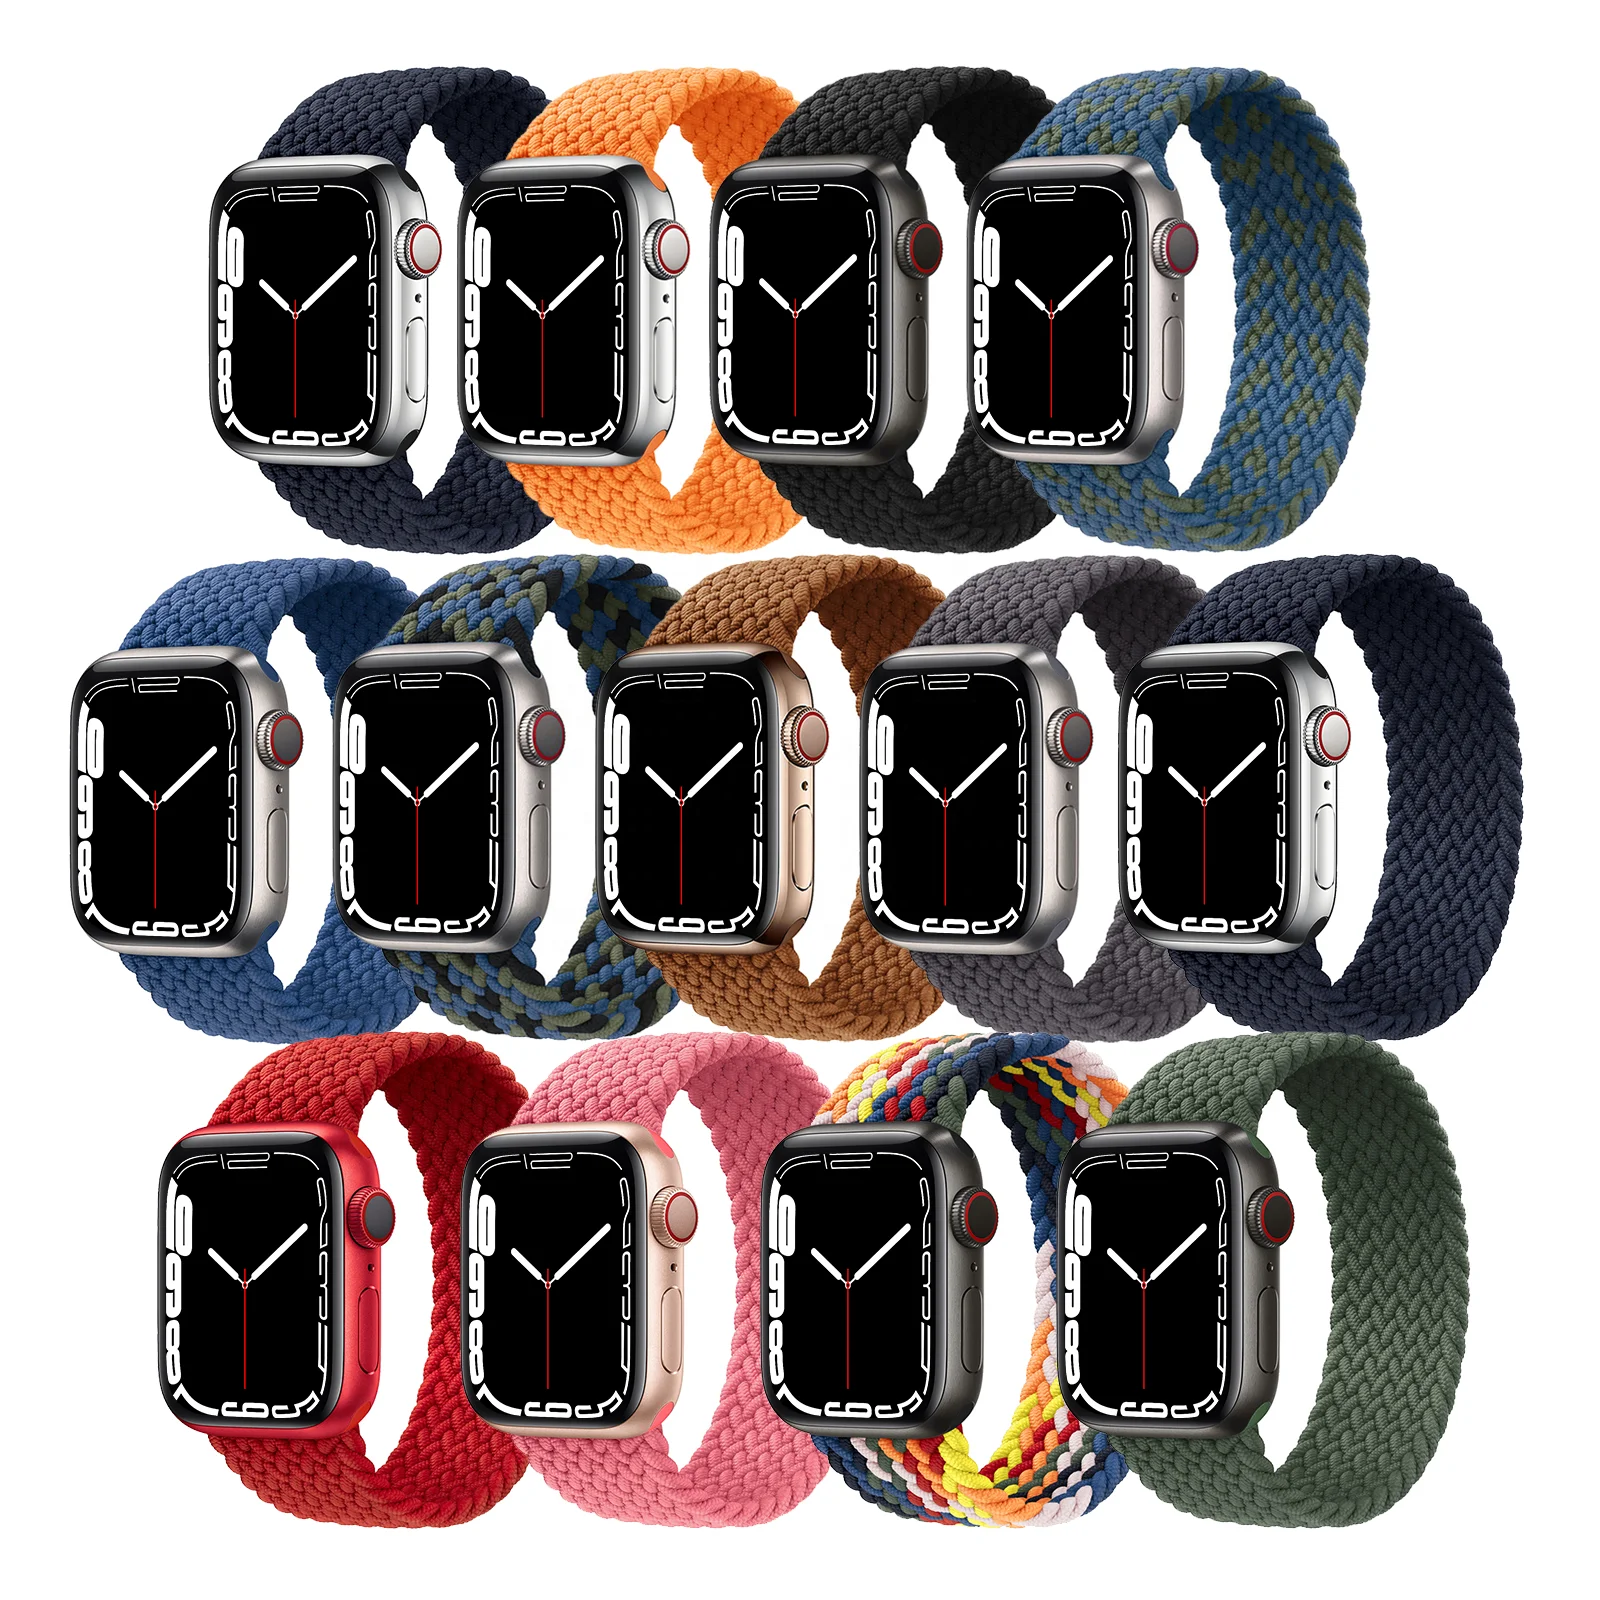 

Best Selling Nylon Elastic Band Nylon Woven Bands Braided Solo Loop Nato Watch Straps For Iwatch Series 7654SE Apple Watch Band, Optional